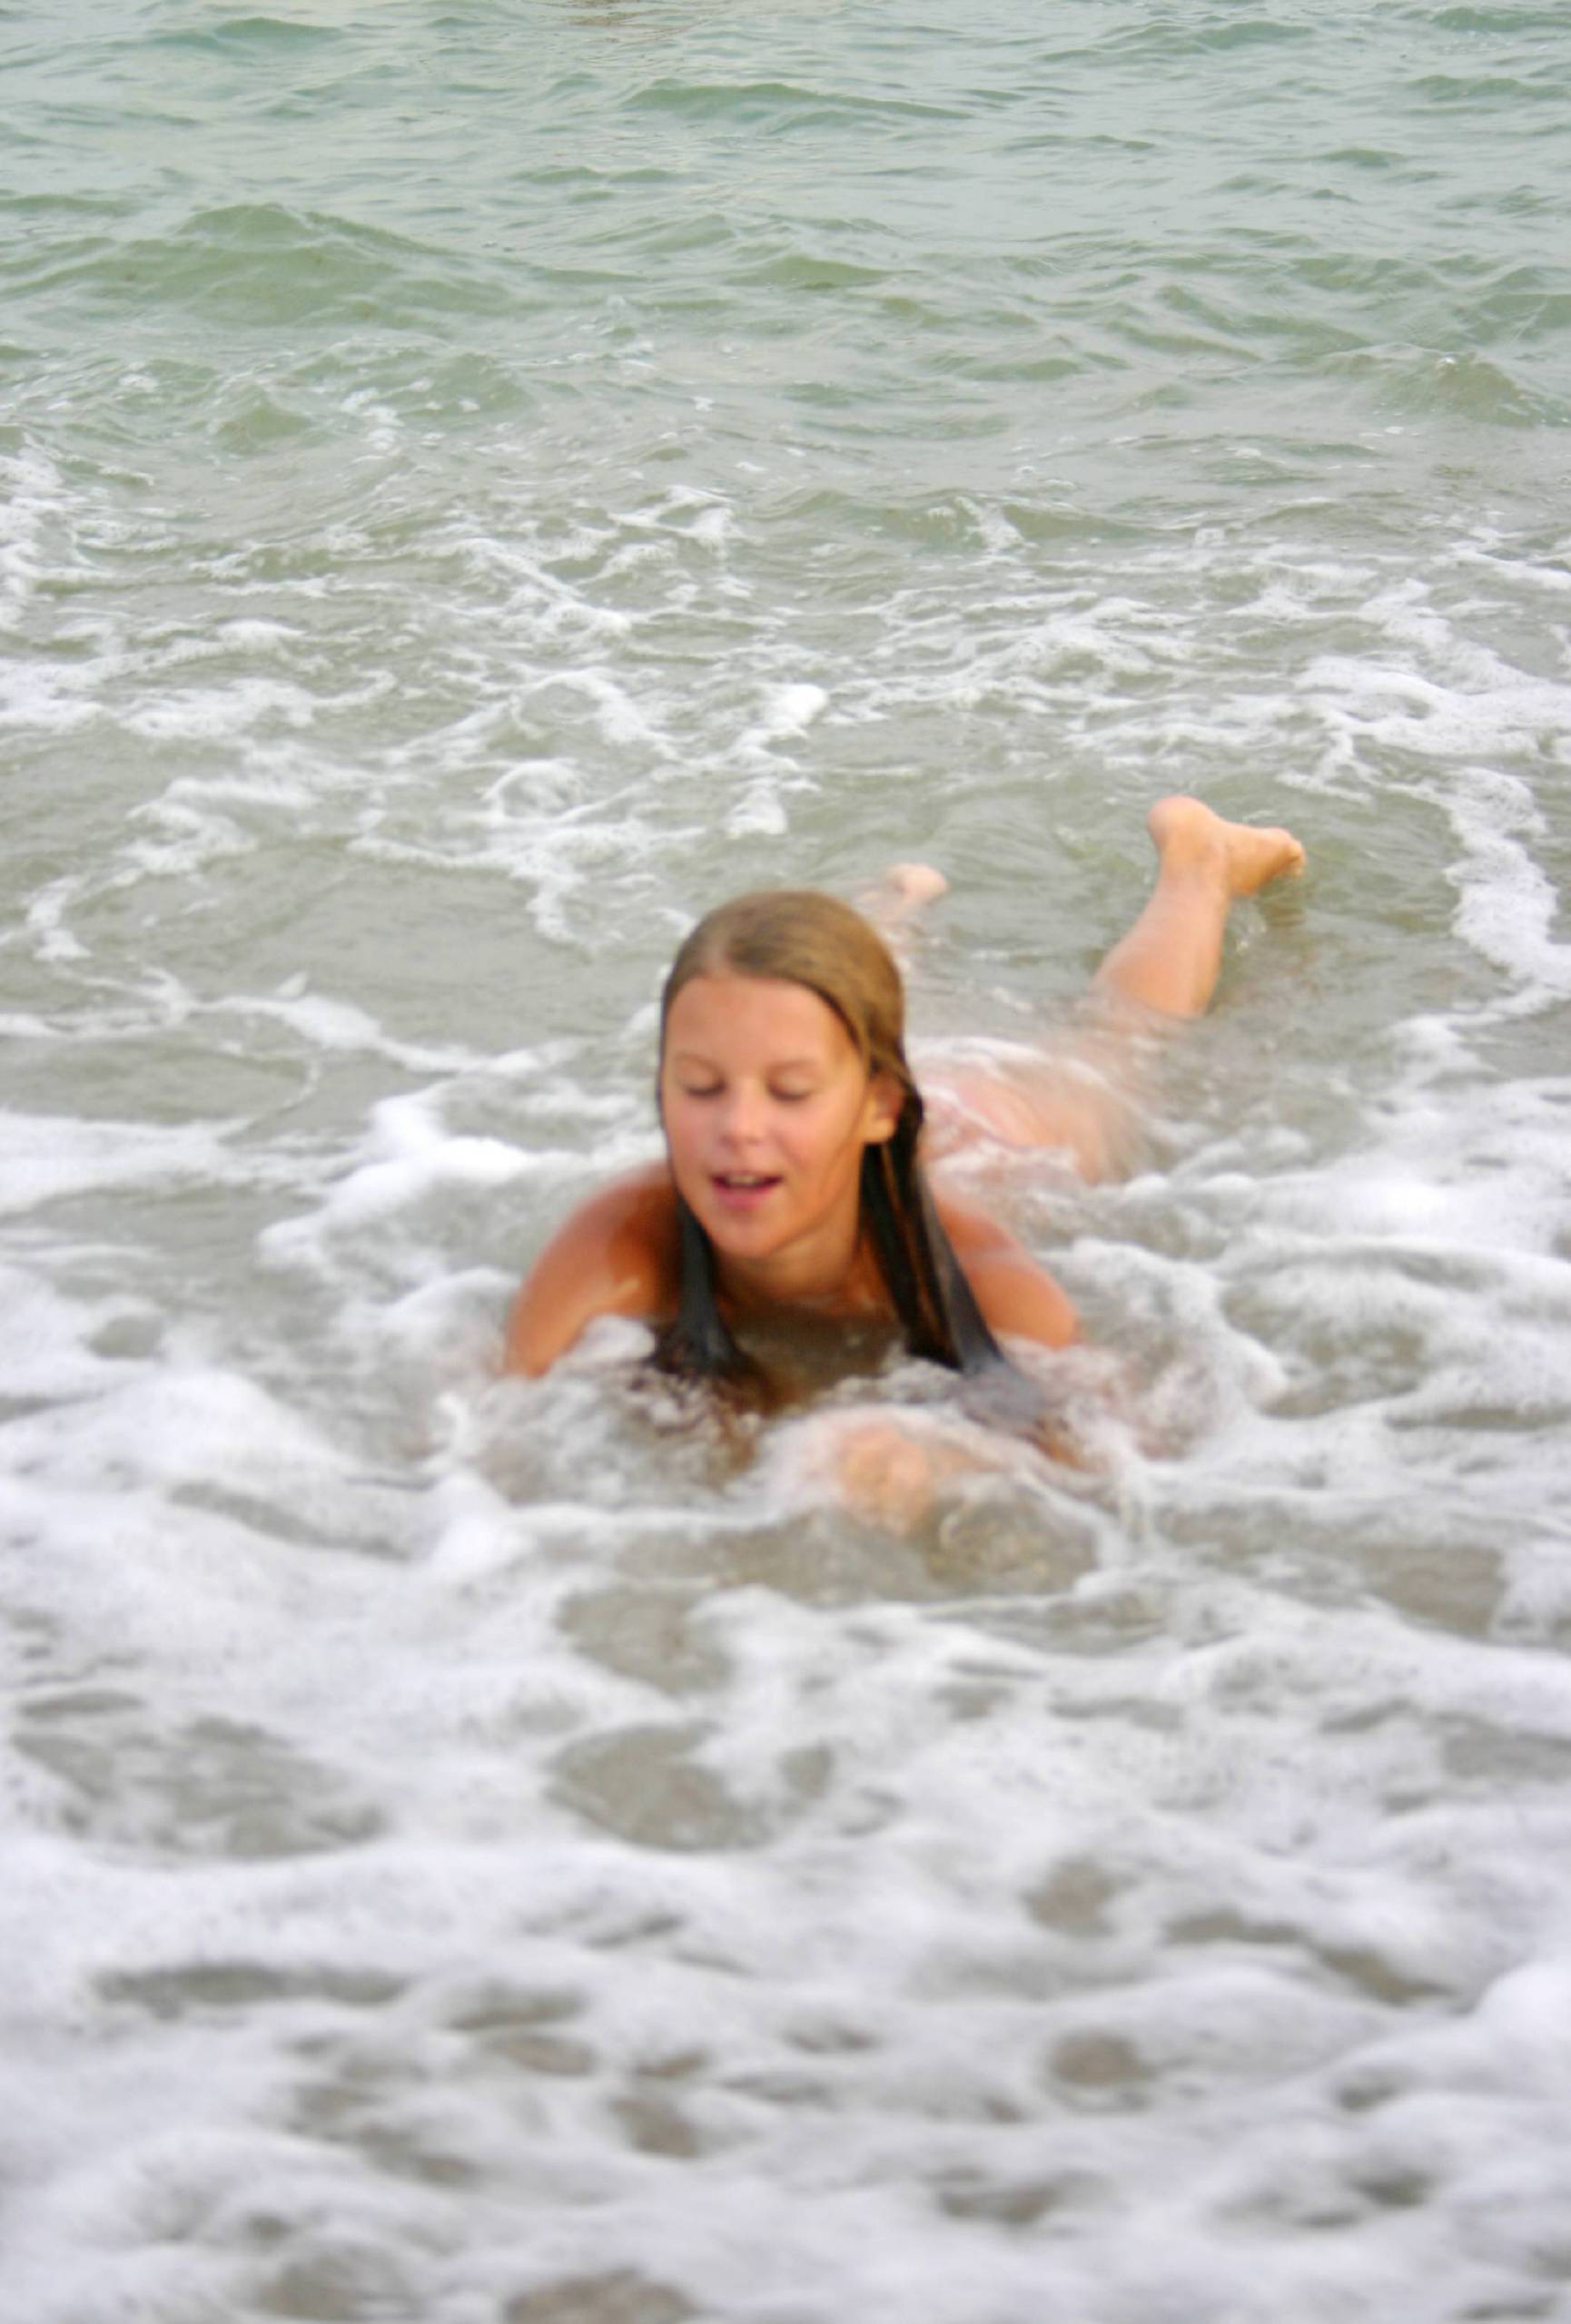 Pure Nudism Images Low Splashes in the Wave - 1